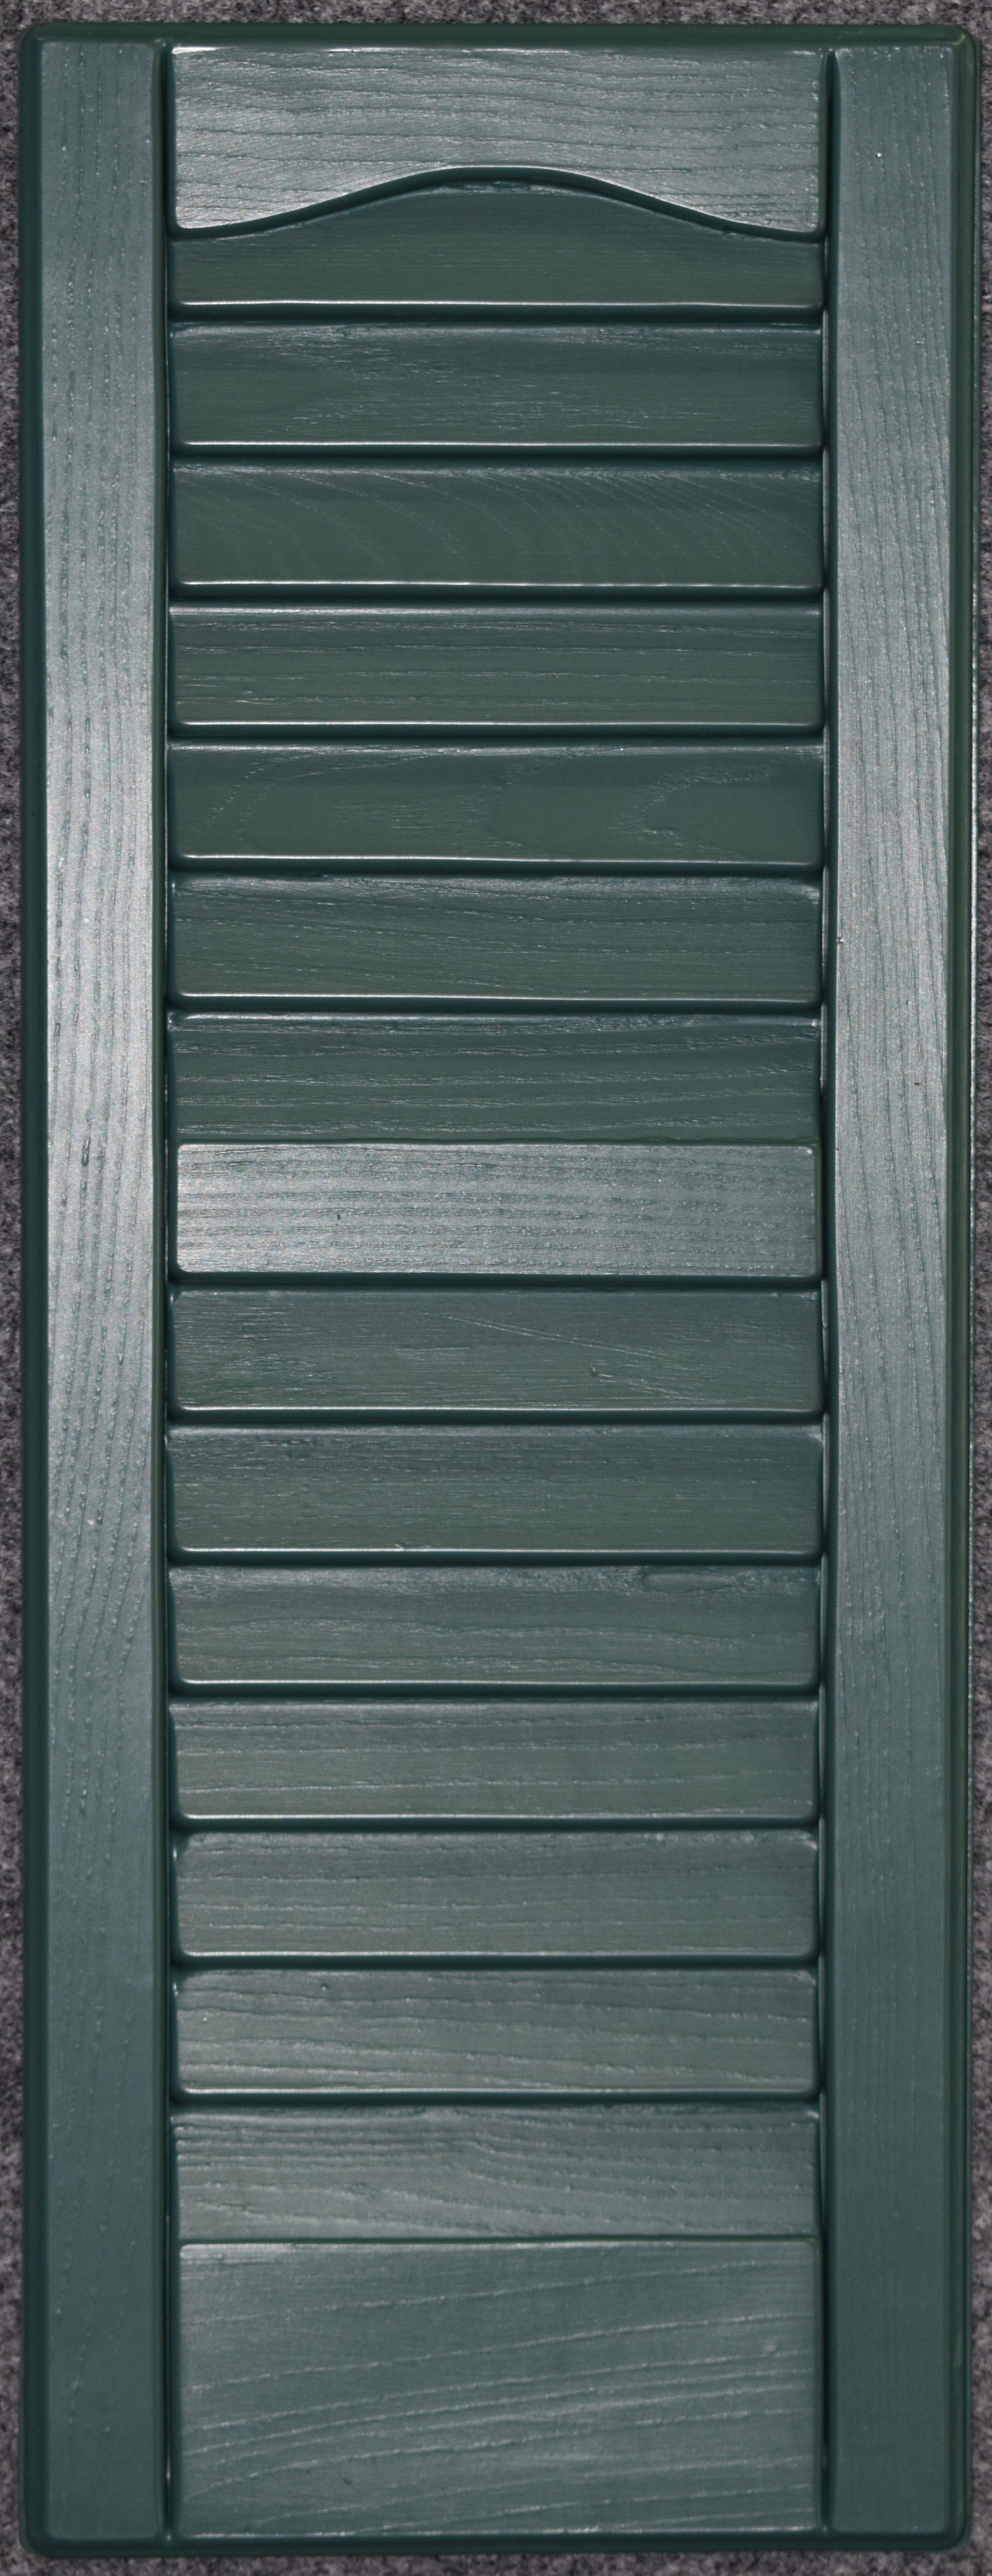 L1251gn-fh 12 X 51 In. Louvered Exterior Decorative Shutters, Hunter Green